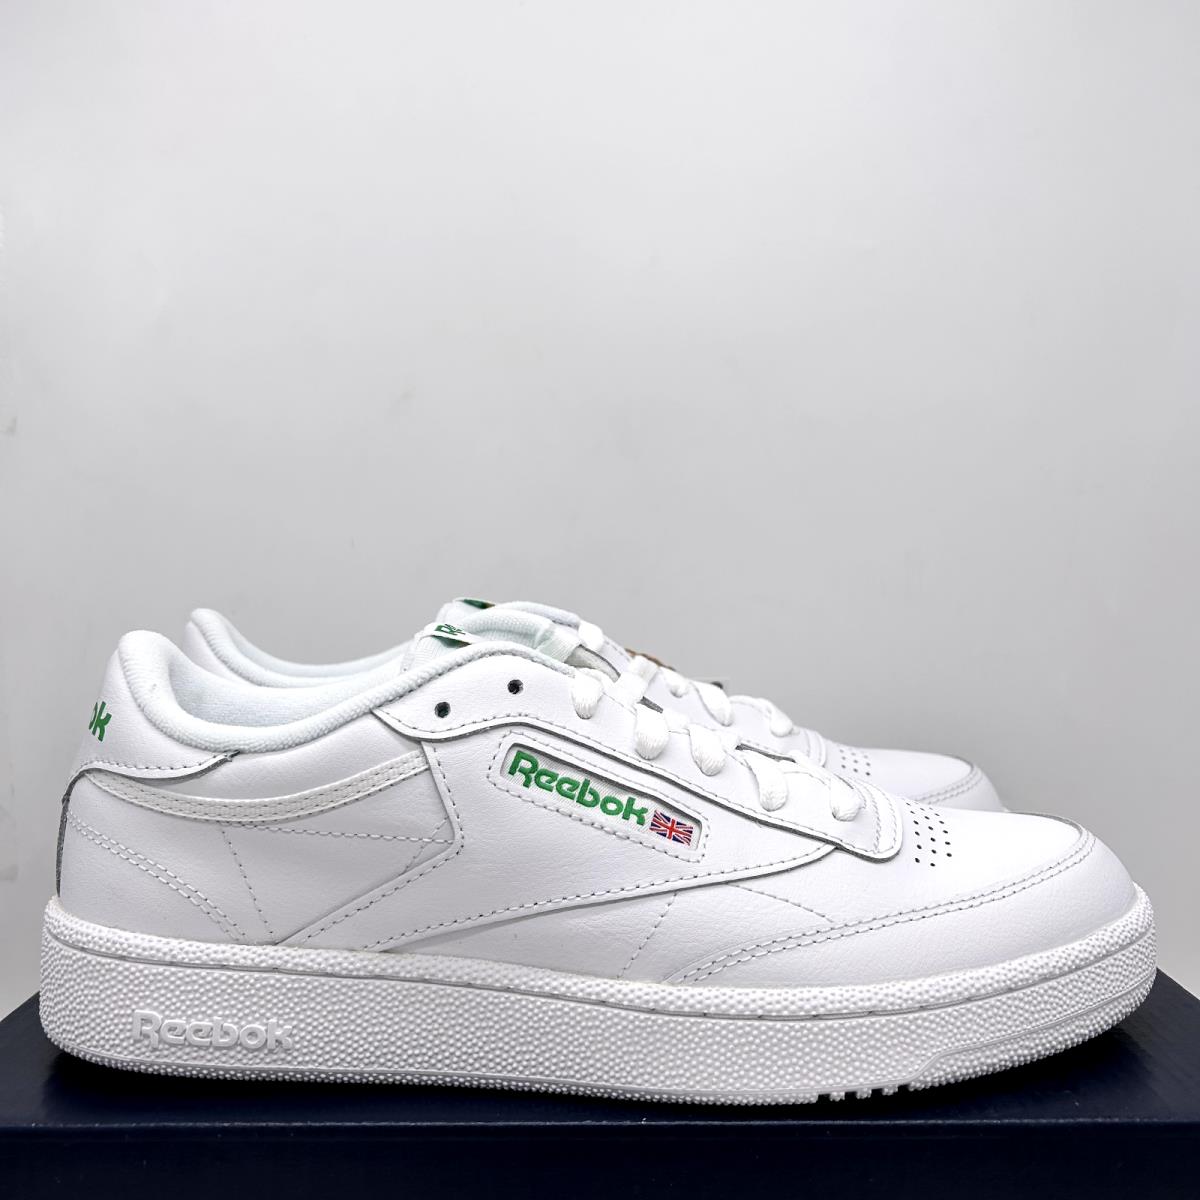 Reebok Classic Club C 85 Sneakers Trainers White Green AR0456 Mens Size 8.5 - White